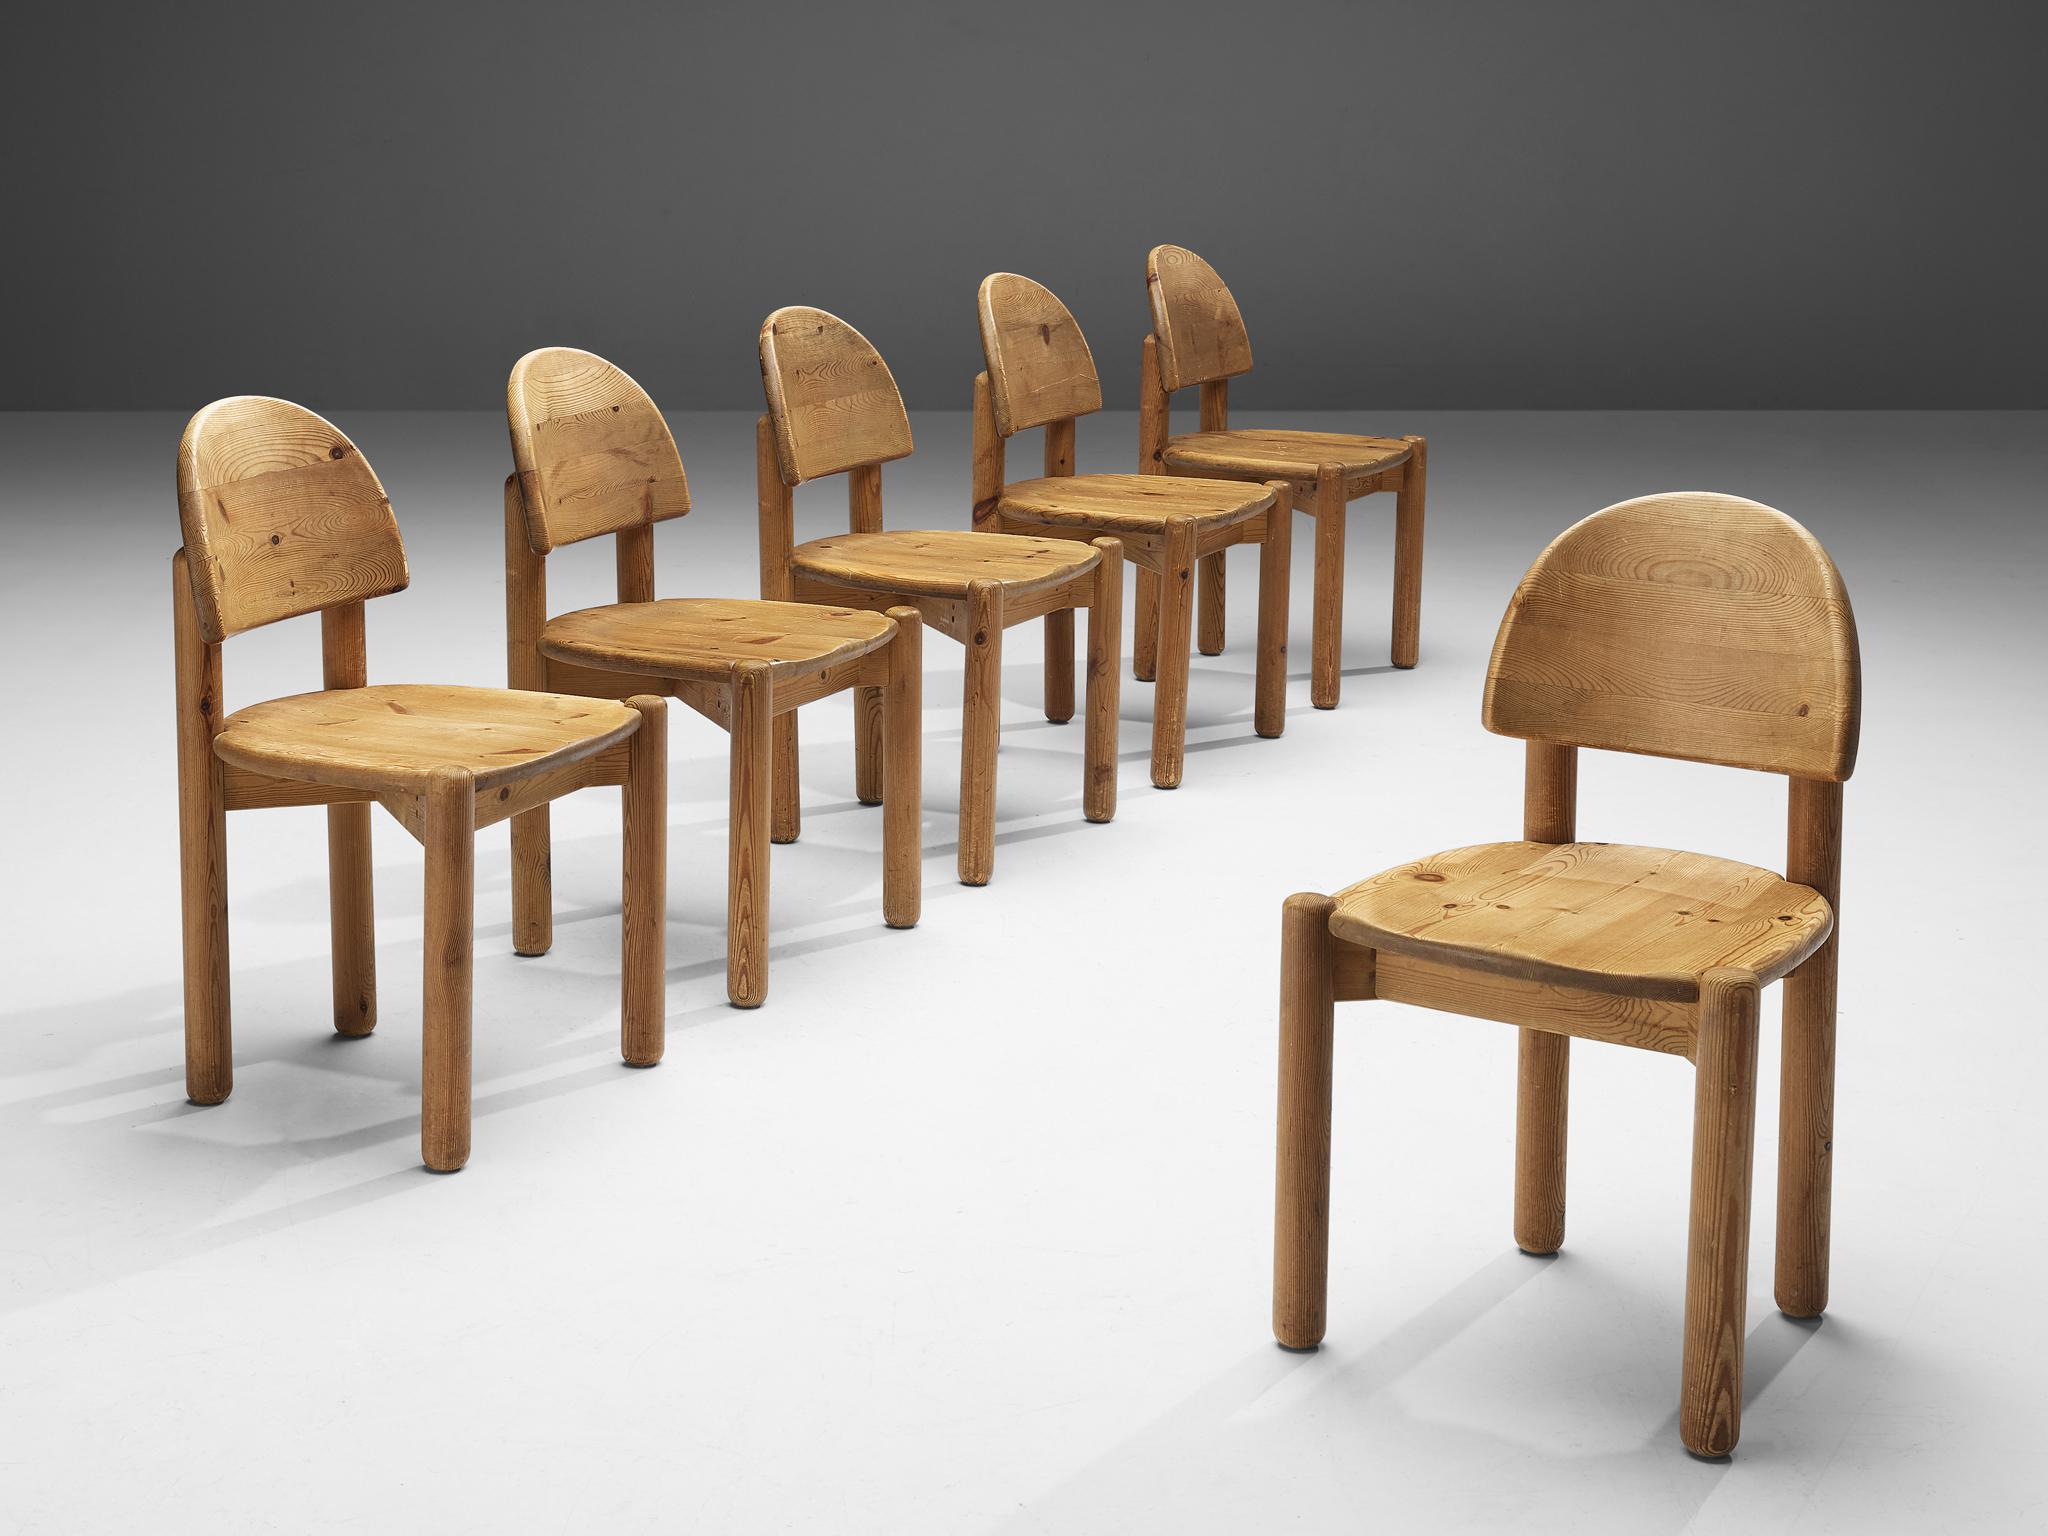 Dining chairs, pine, Denmark 1970s. 

Beautiful, organic and natural dining chairs in solid pine. A simplistic design with a round seating and attention for the natural expression and grain of the wood. These chairs hold a beautiful curved back